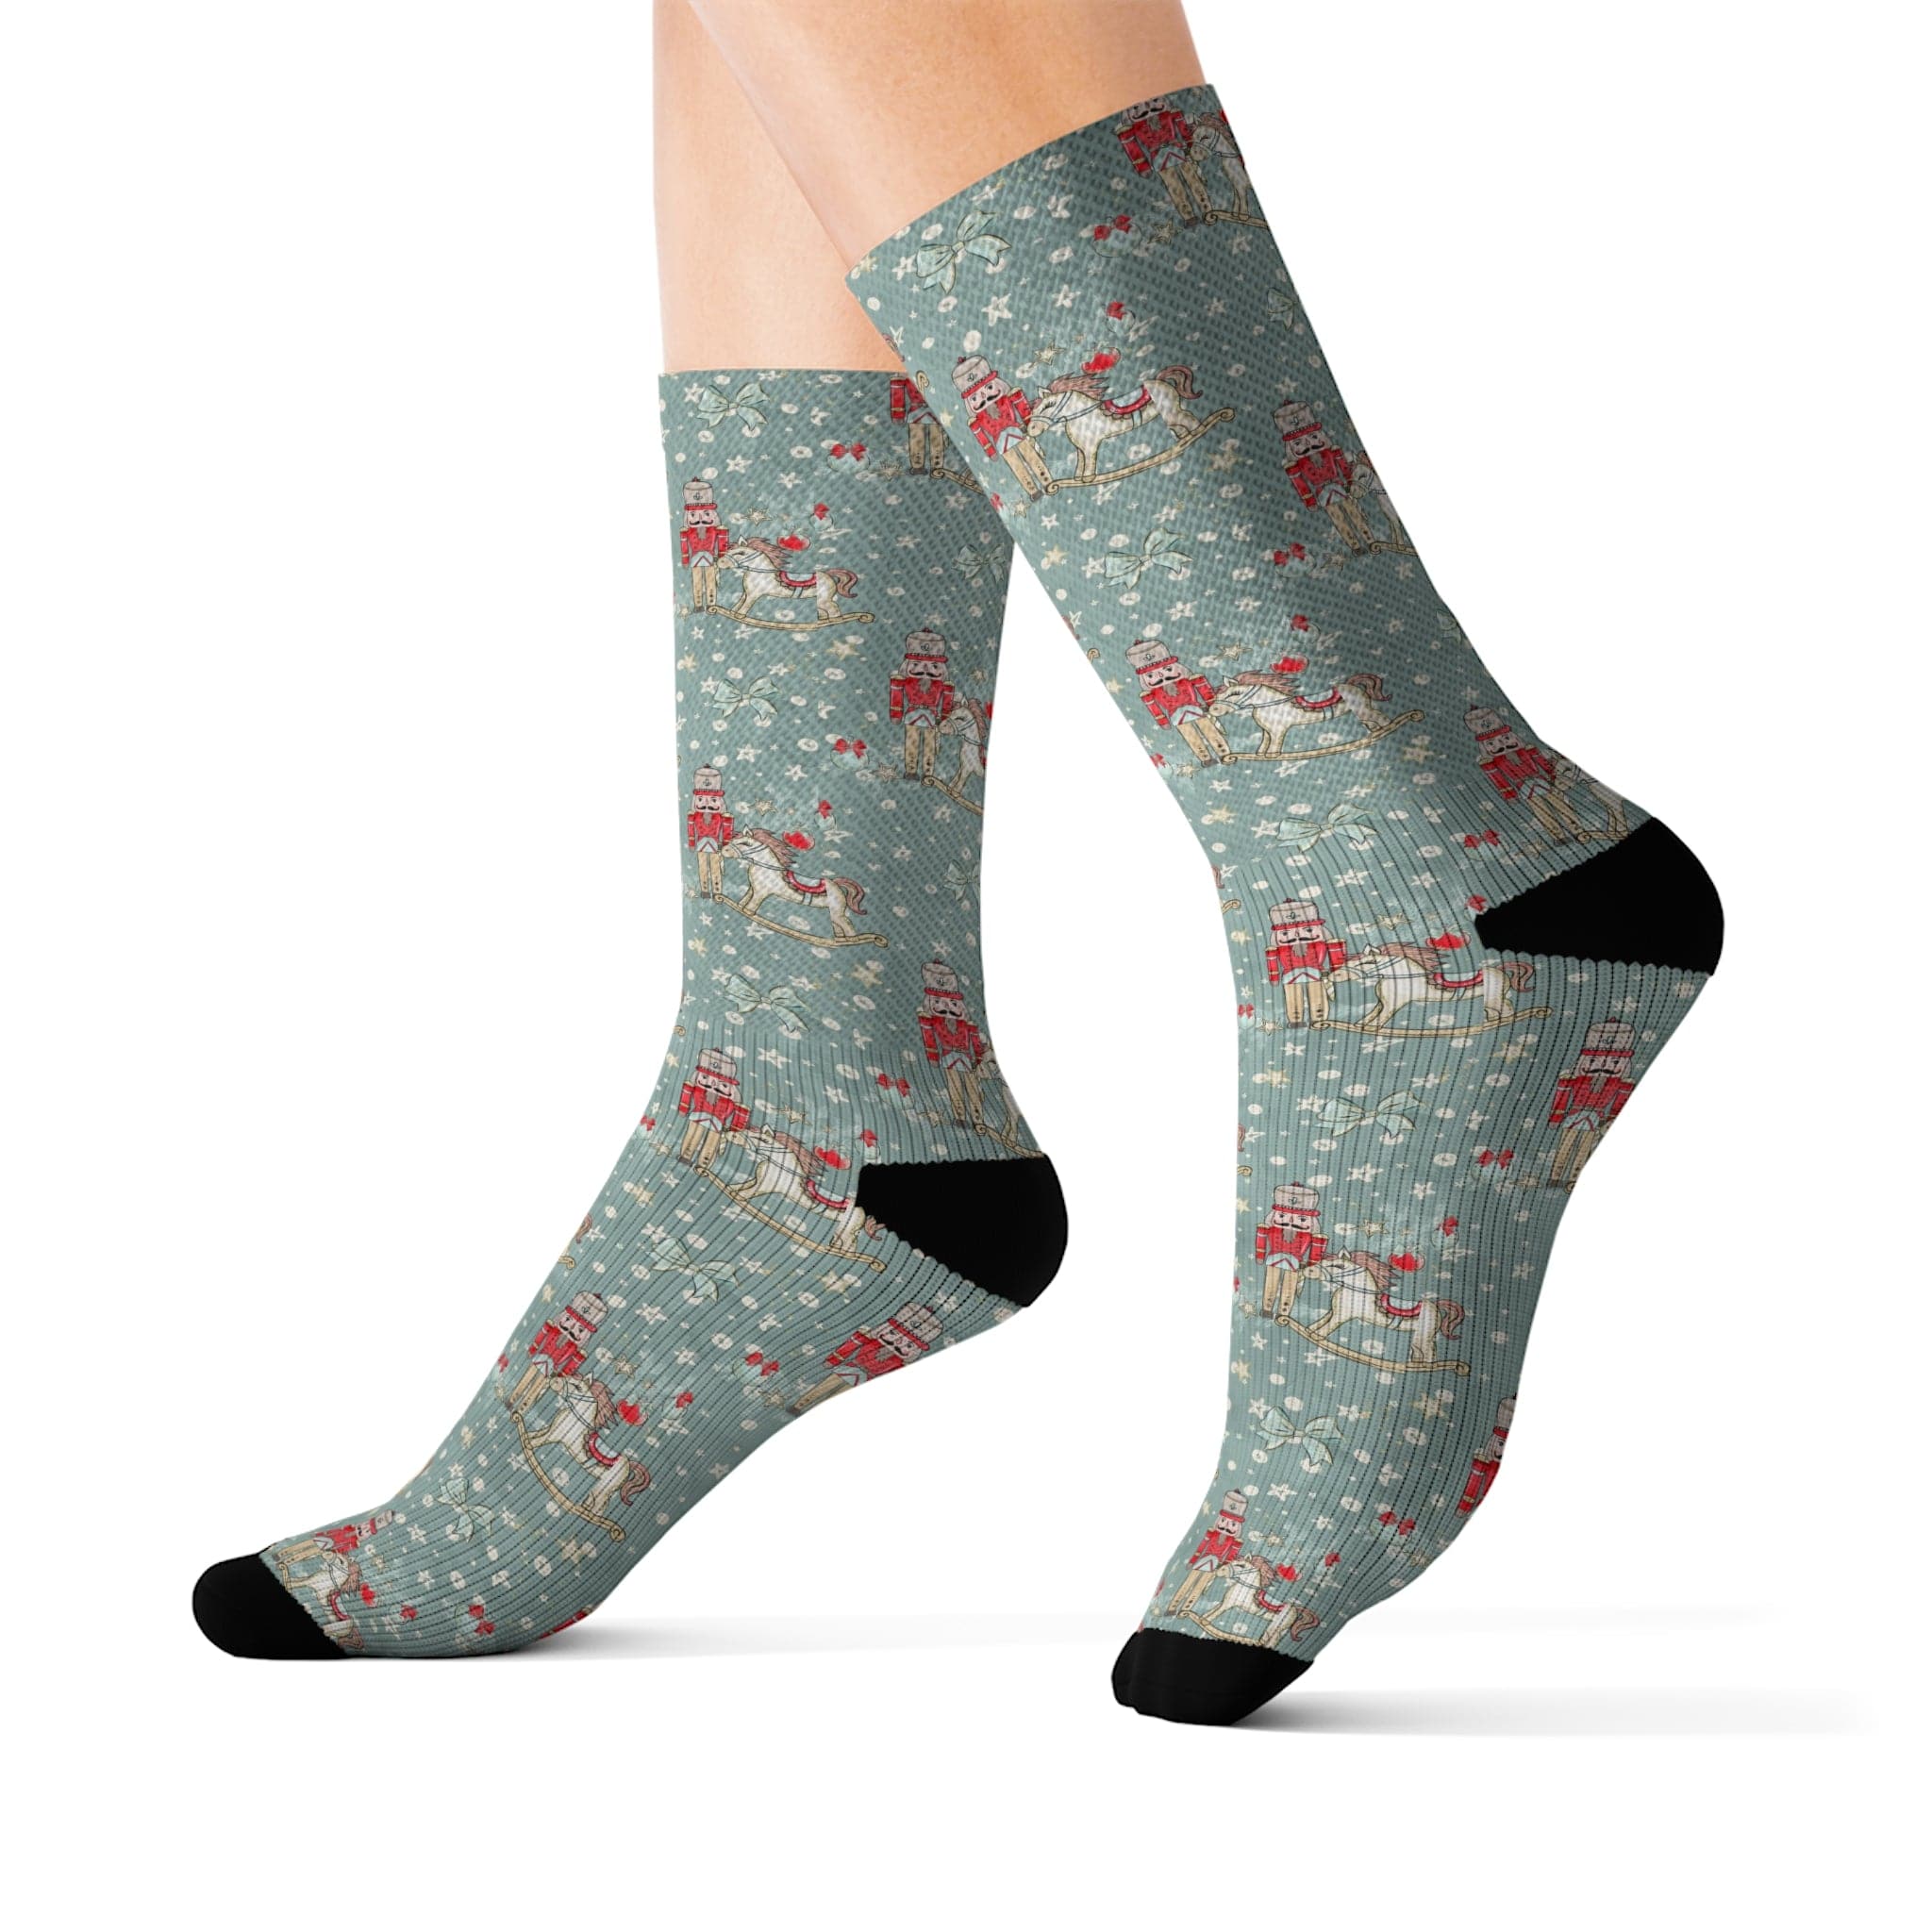 Printify Festive Nutcracker Christmas Socks: Cozy Crew Length with Fleece Lining - Perfect for Men and Women, Holiday Gifts, Stocking Stuffers All Over Prints L 10322468349826018492